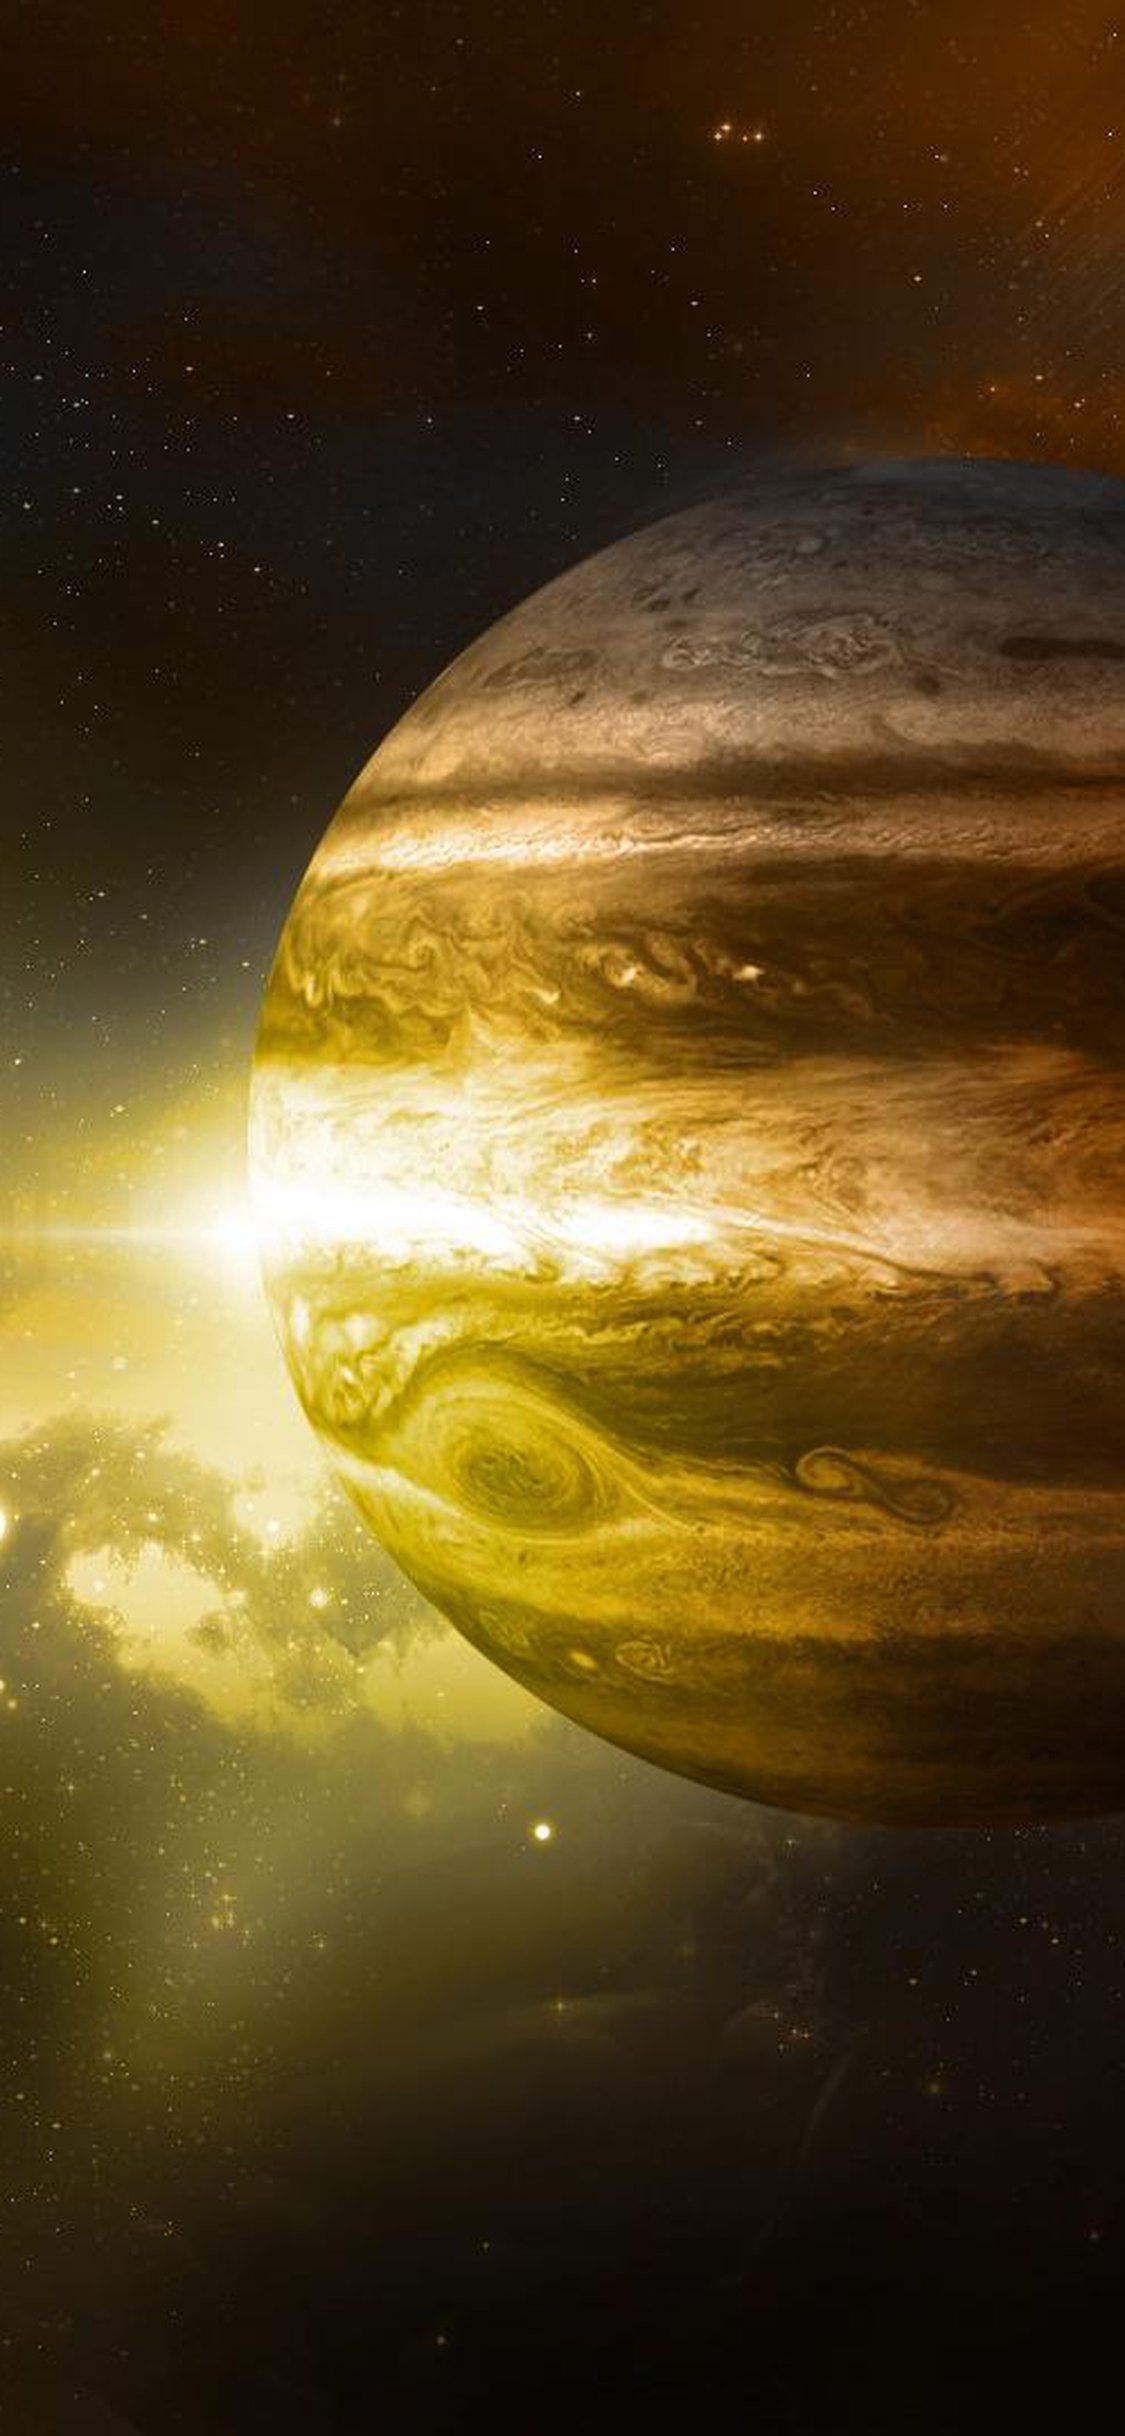 1125x2436 Iphone X Jupiter Planet Wallpaper Space Wallpaper For Phone